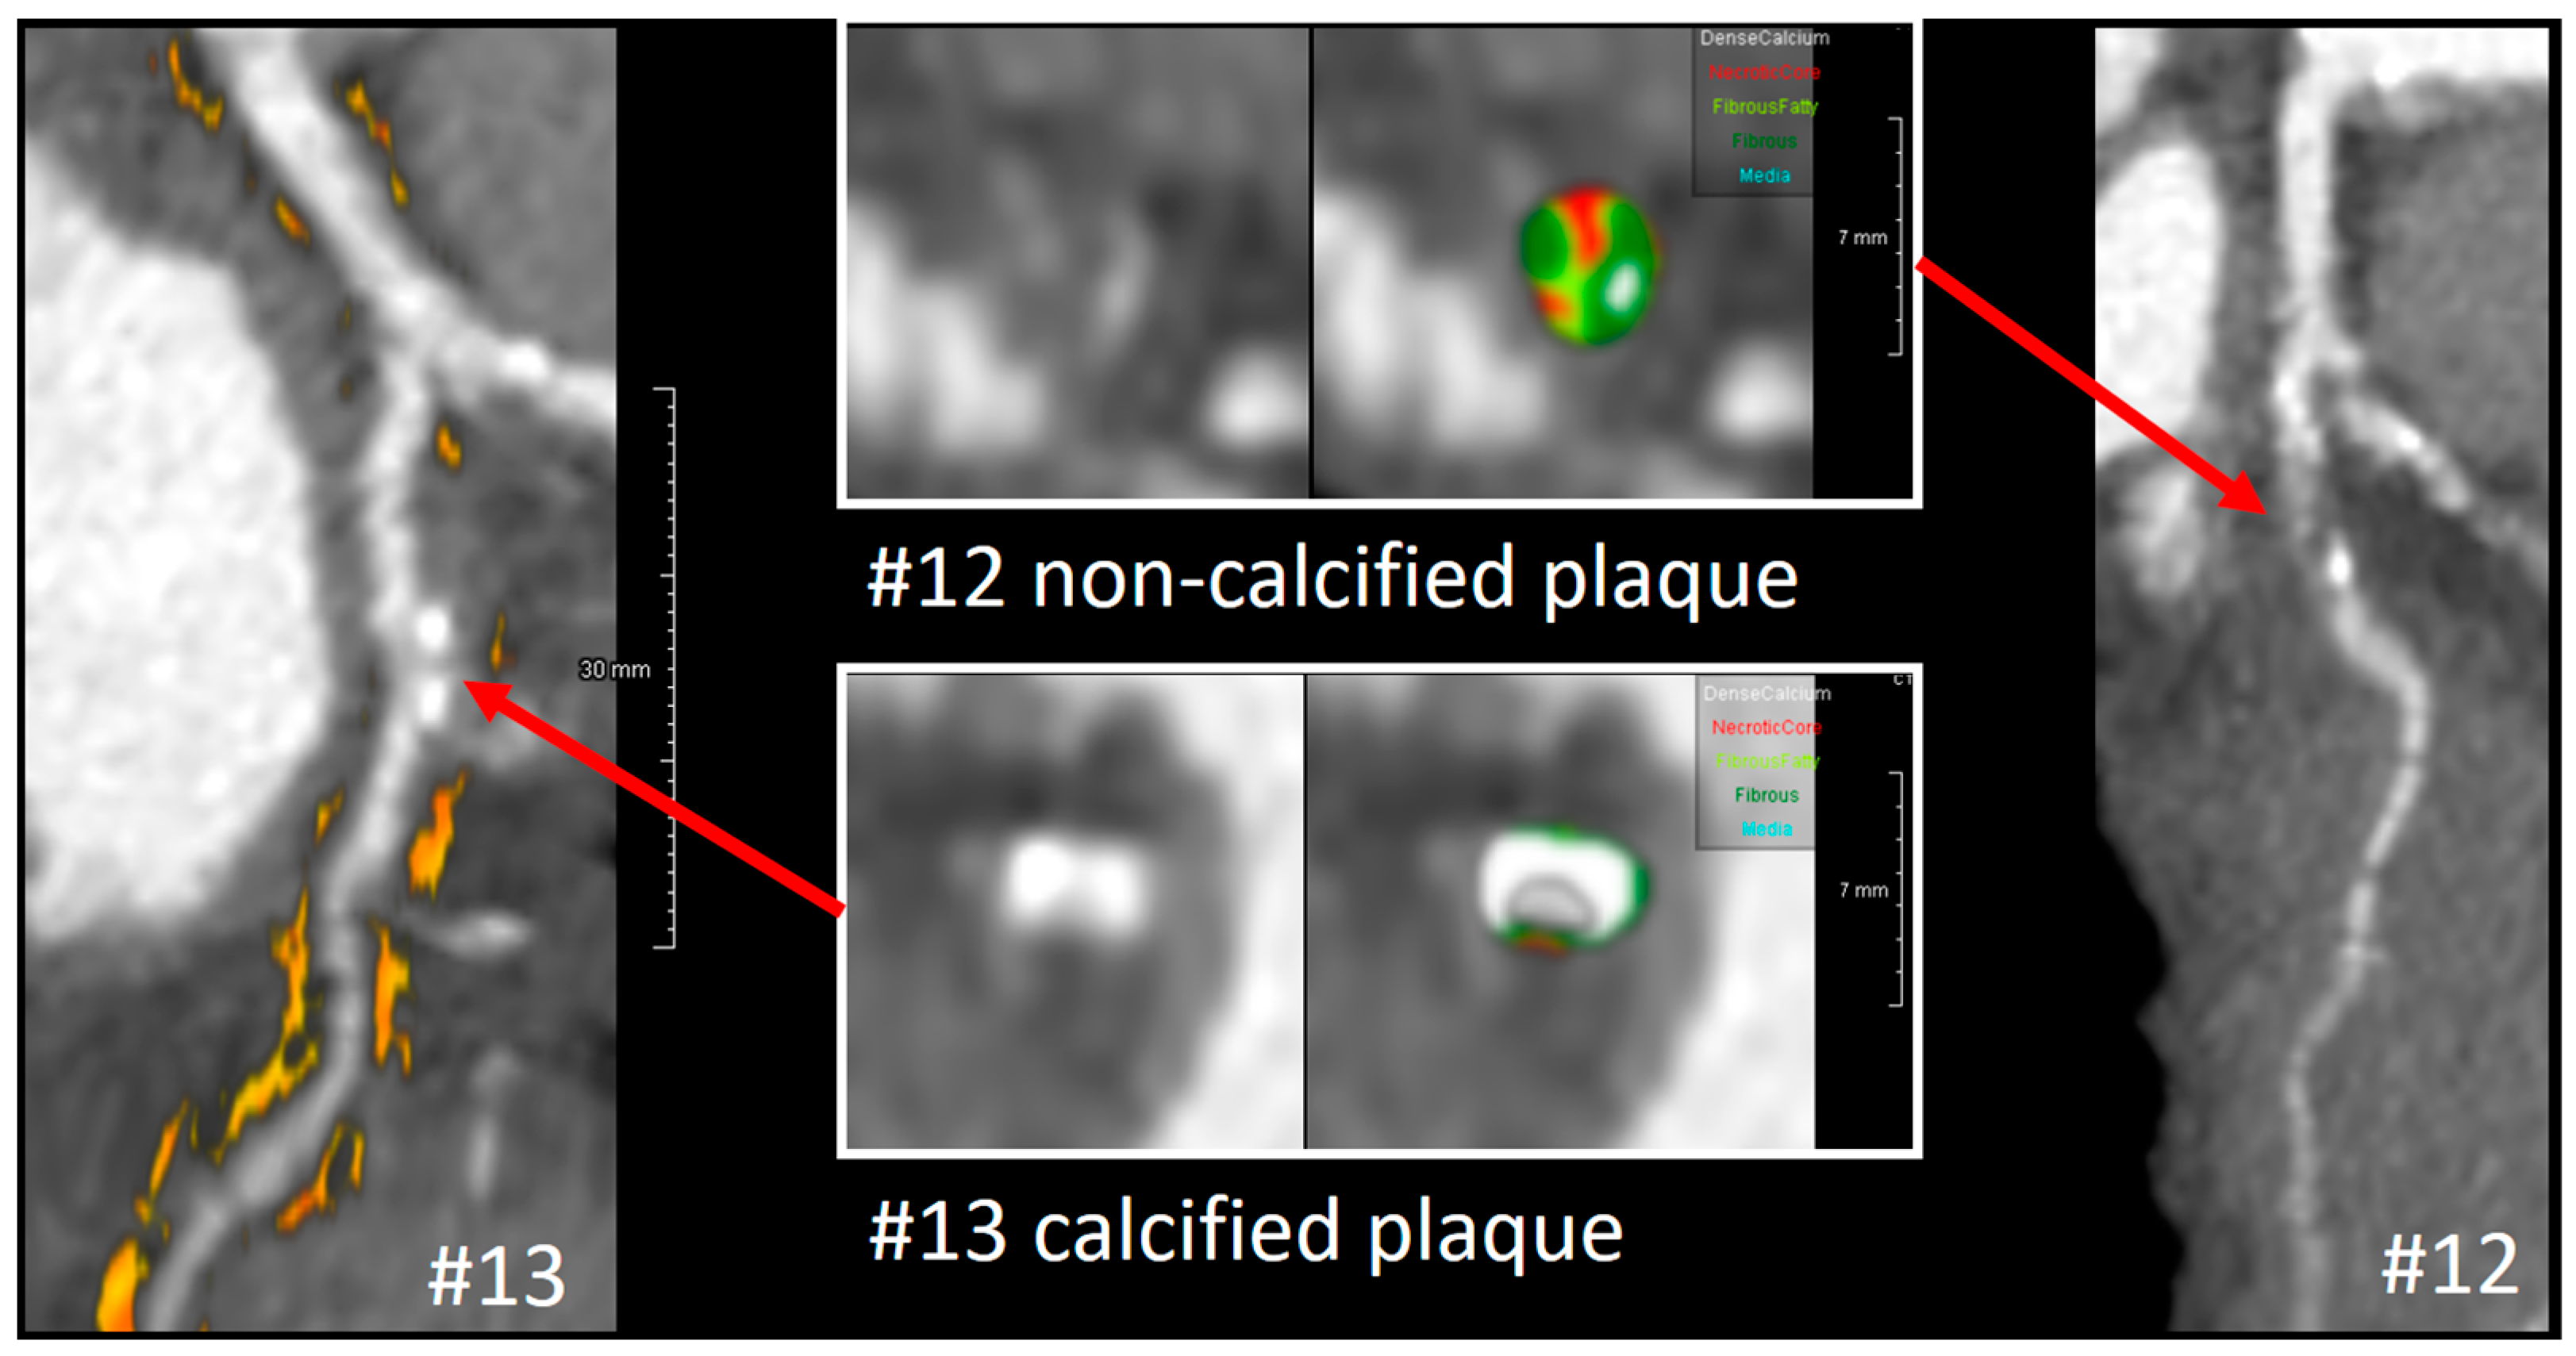 Frontiers | Commentary: Plaque Features and Epicardial Fat Volume for  Cardiovascular Risk Assessment—A Key Role With Cardiac Computed Tomography?